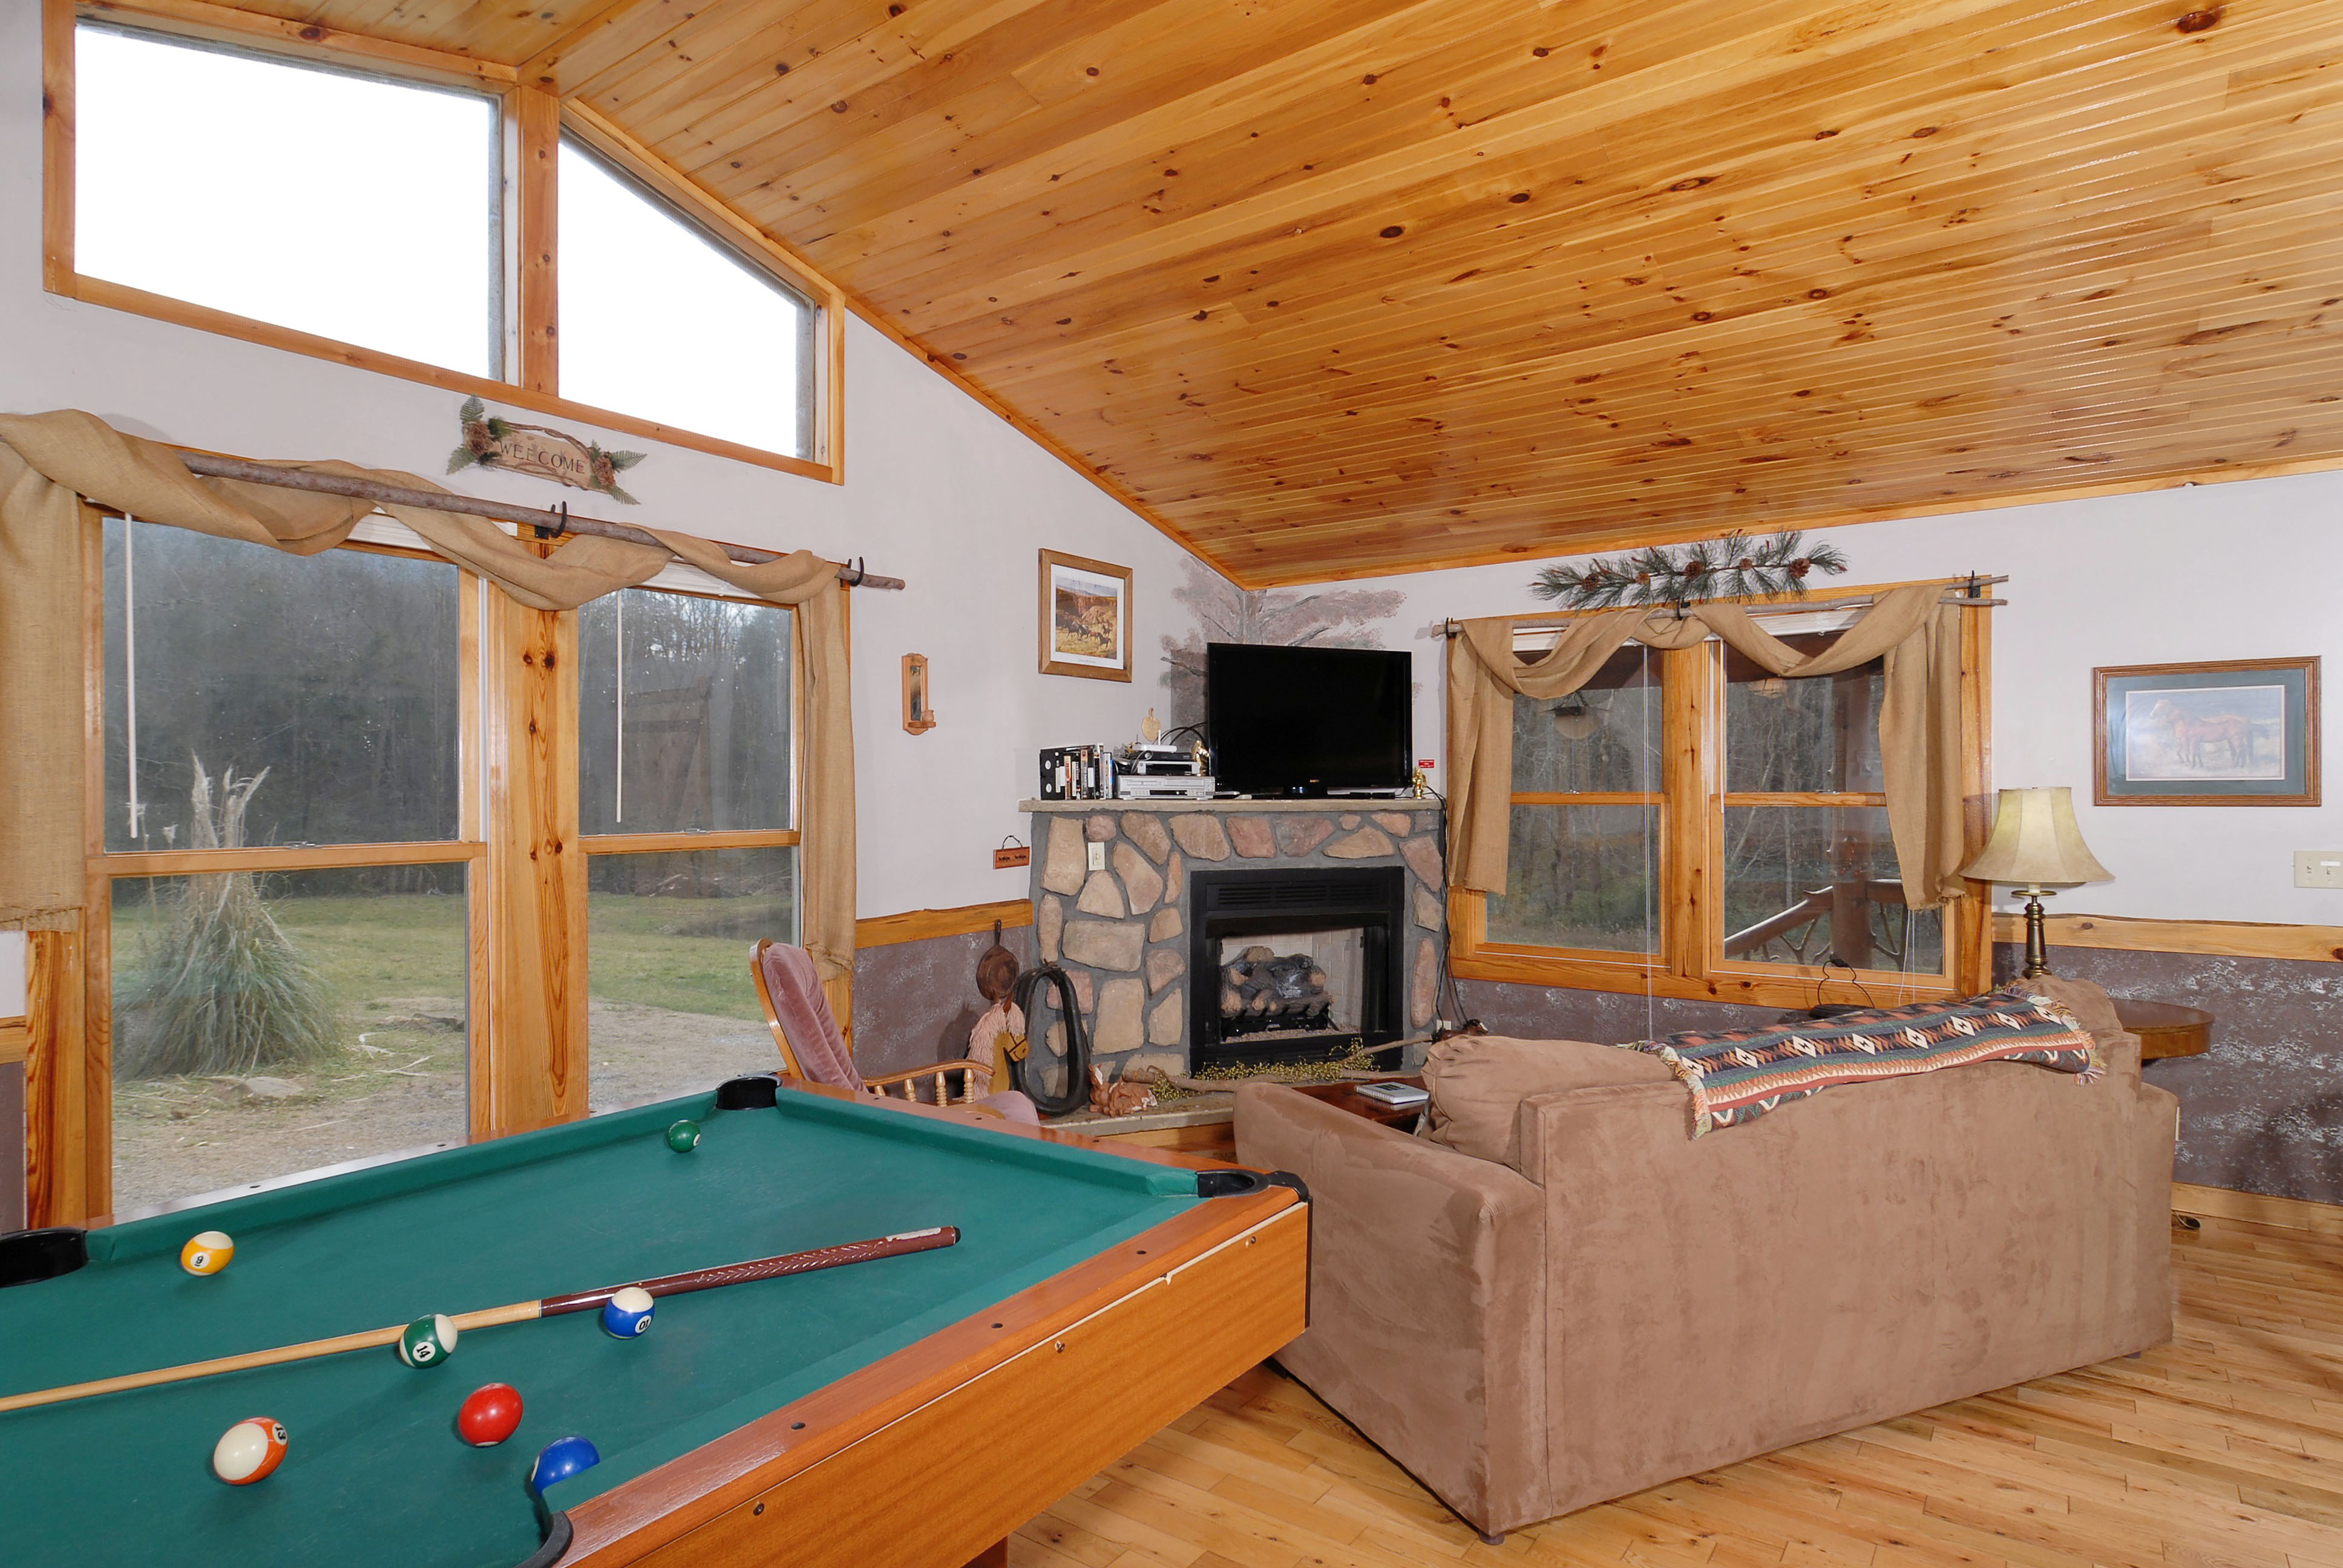 Pigeon Forge One Bedroom Cabin with a pool table that over looks the living room area in a Smoky Mountain Cabin off of Wears Valley Road